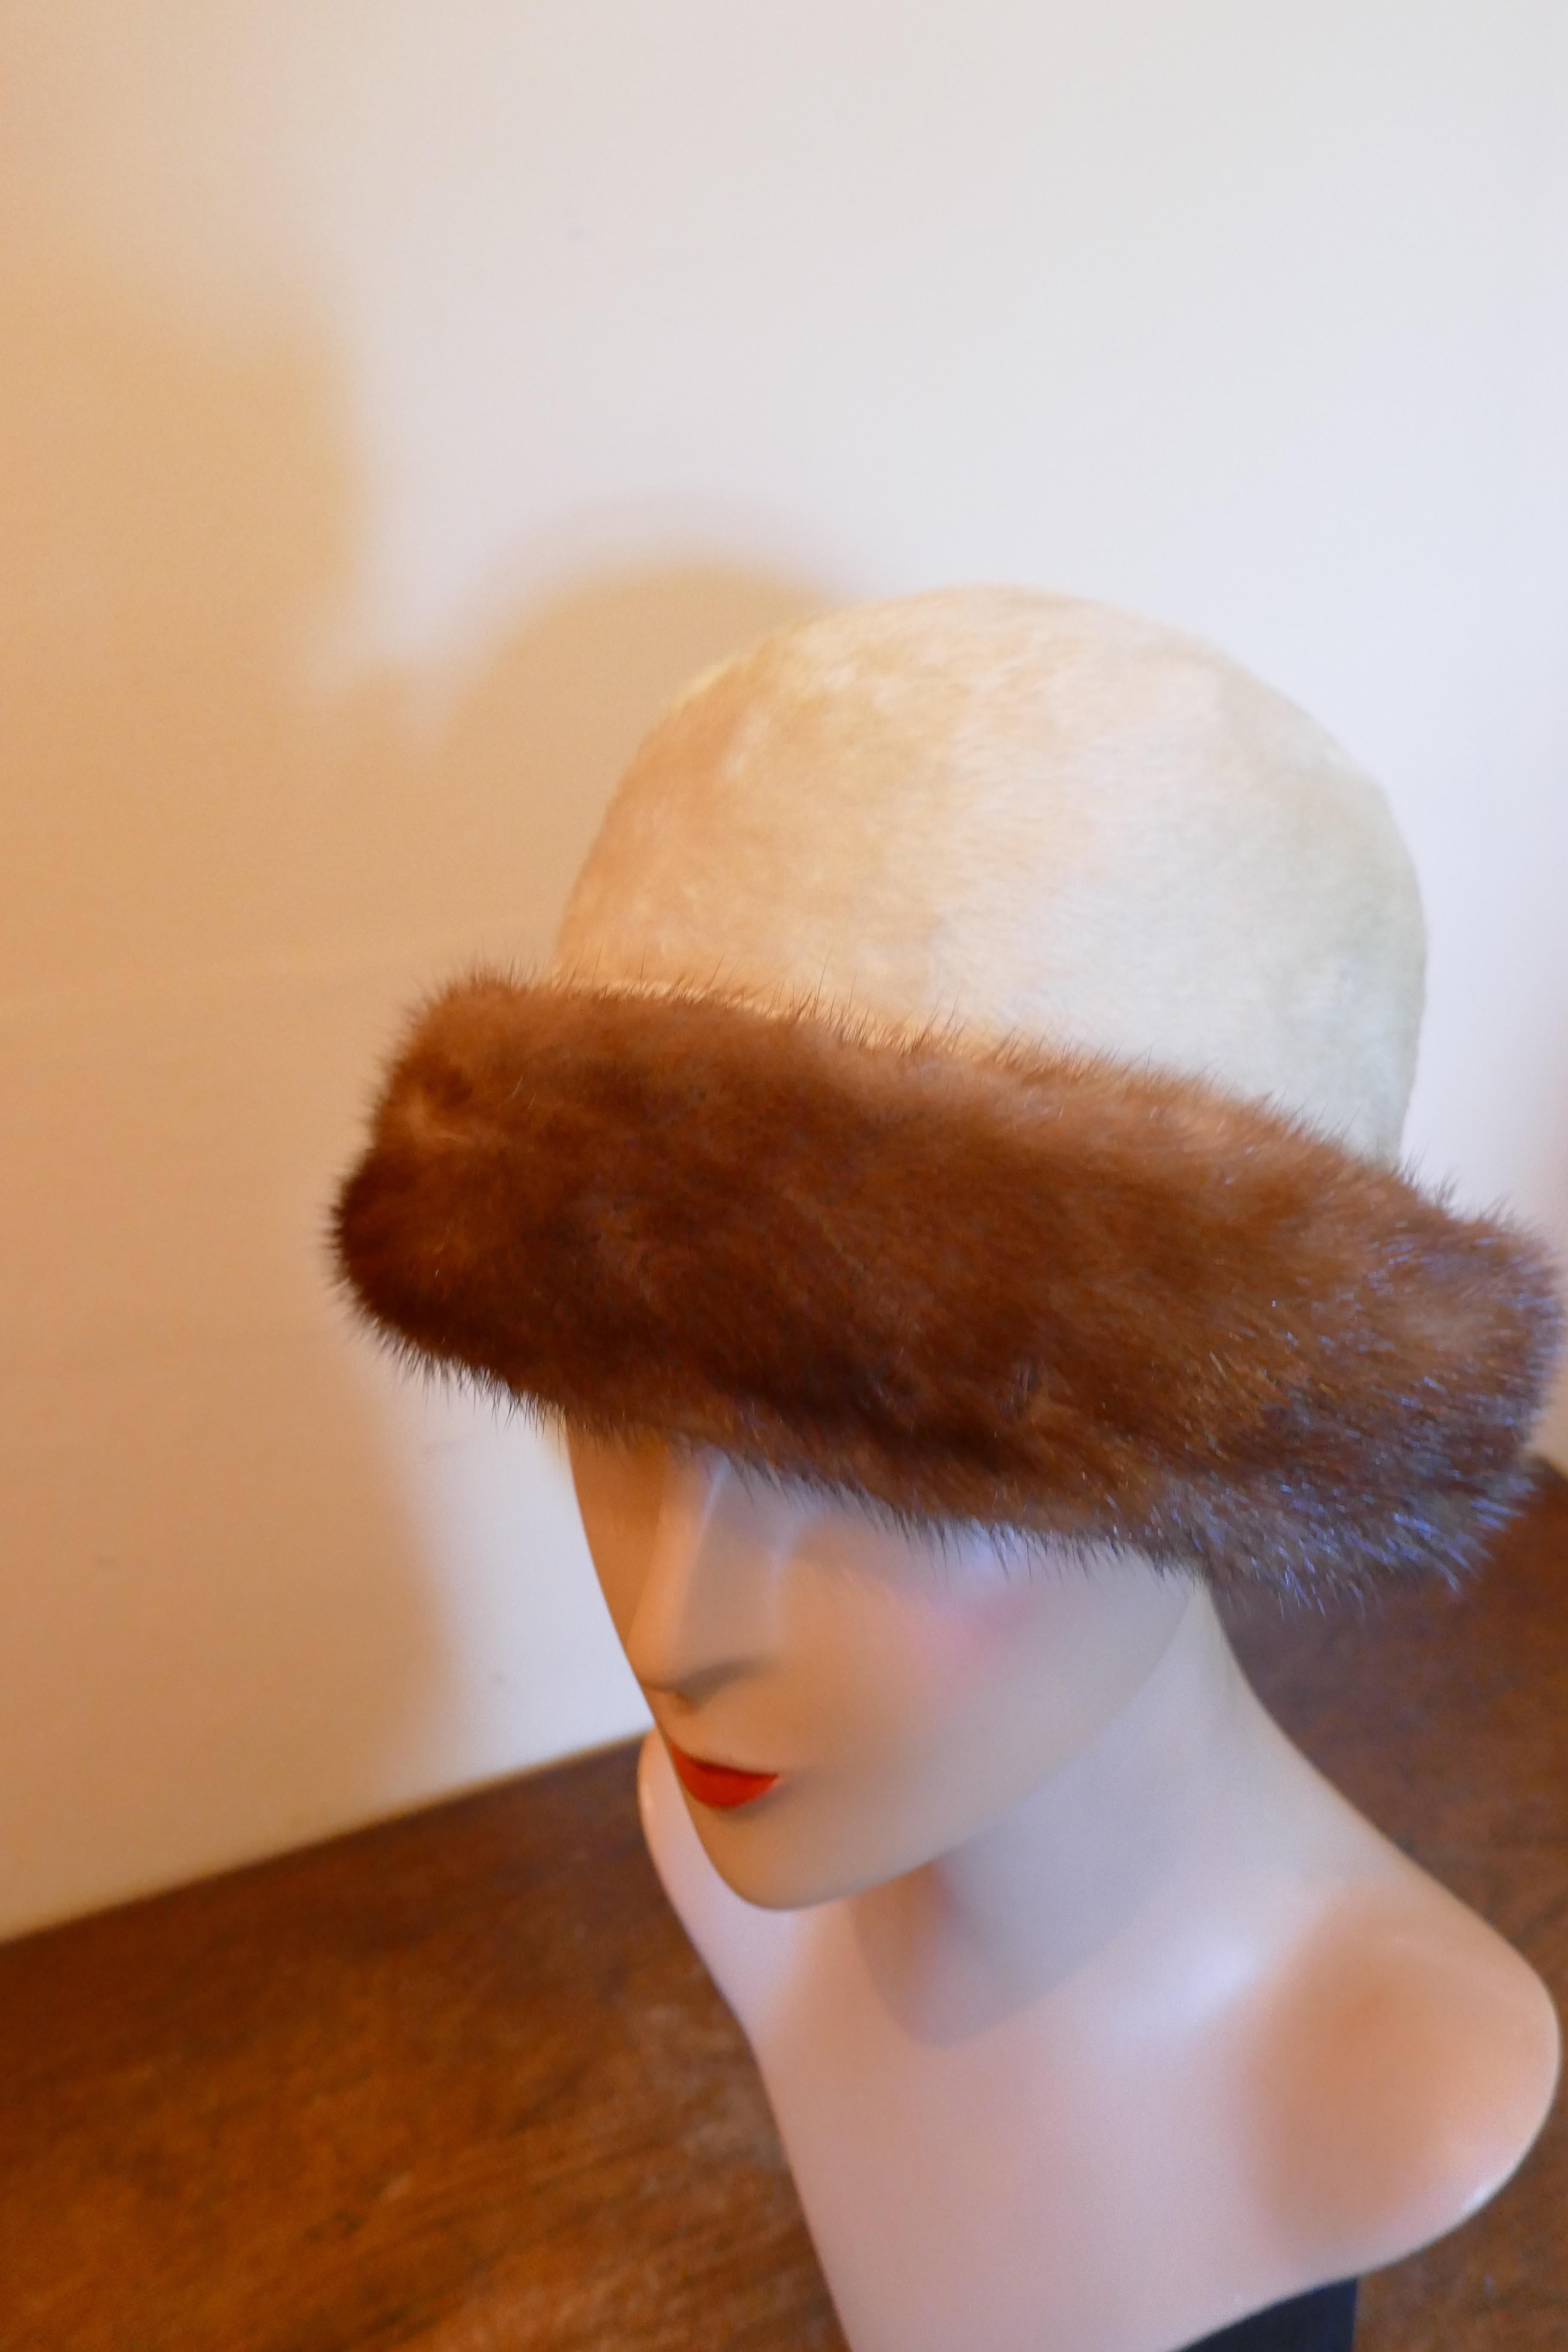 Beautiful 1920s Style Felt Fur Cloche Hat, trimmed with Mink by Panda

Superb Soft Fur Fabric Cloche hat classic 1920s Head Hugging Style, the forehead  brim is trimmed with Mink

The hat is very fine quality and in good condition, the inside